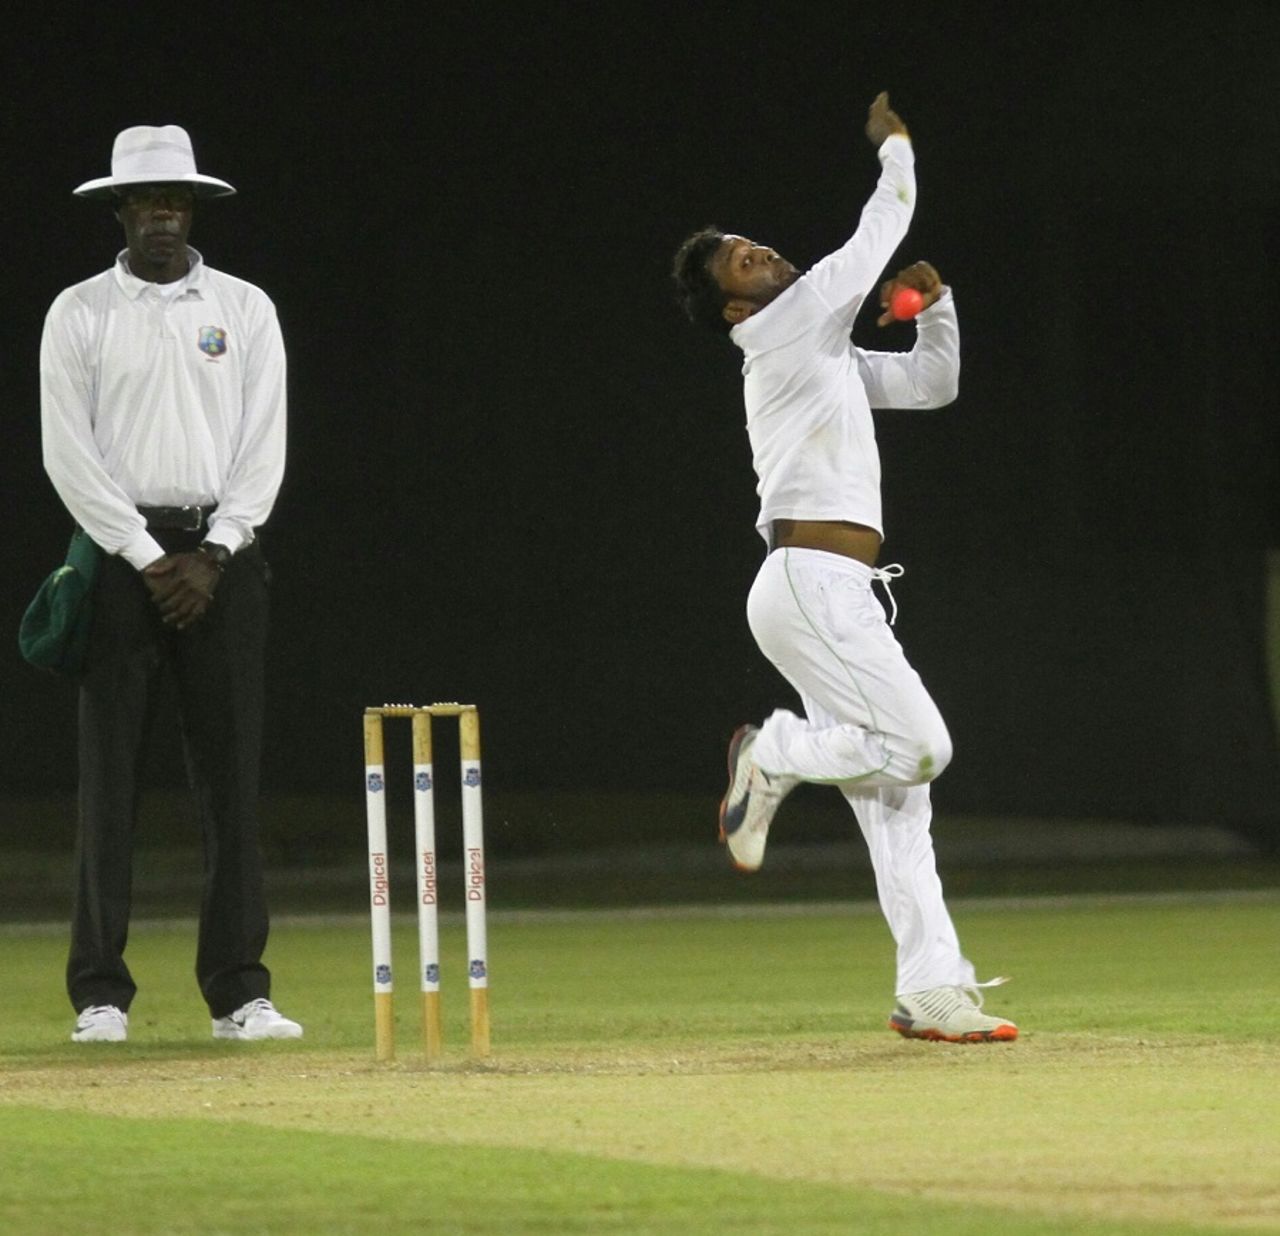 Veerasammy Permaul prepares to deliver a ball, Guyana v Barbados, Regional 4 day tournament, 3rd day, Providence, December 11, 2016